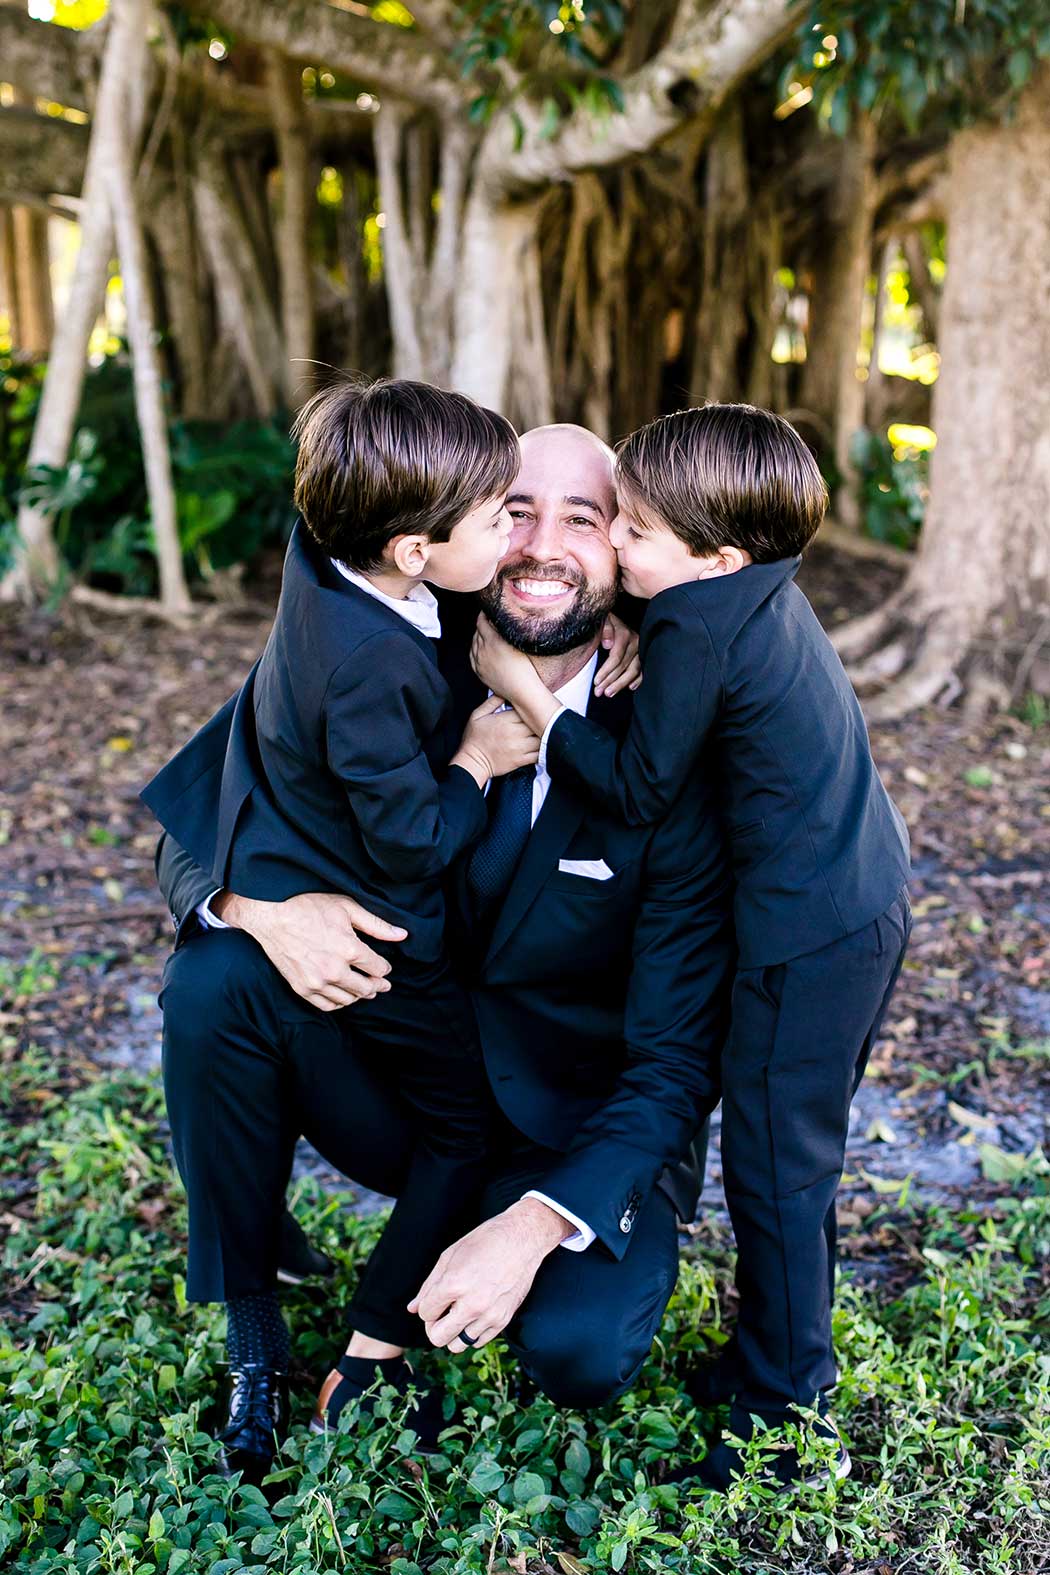 fun dad and twin boys pose for photograph | dad and twin boys photo | dad and son photo | family photography session robbins preserve